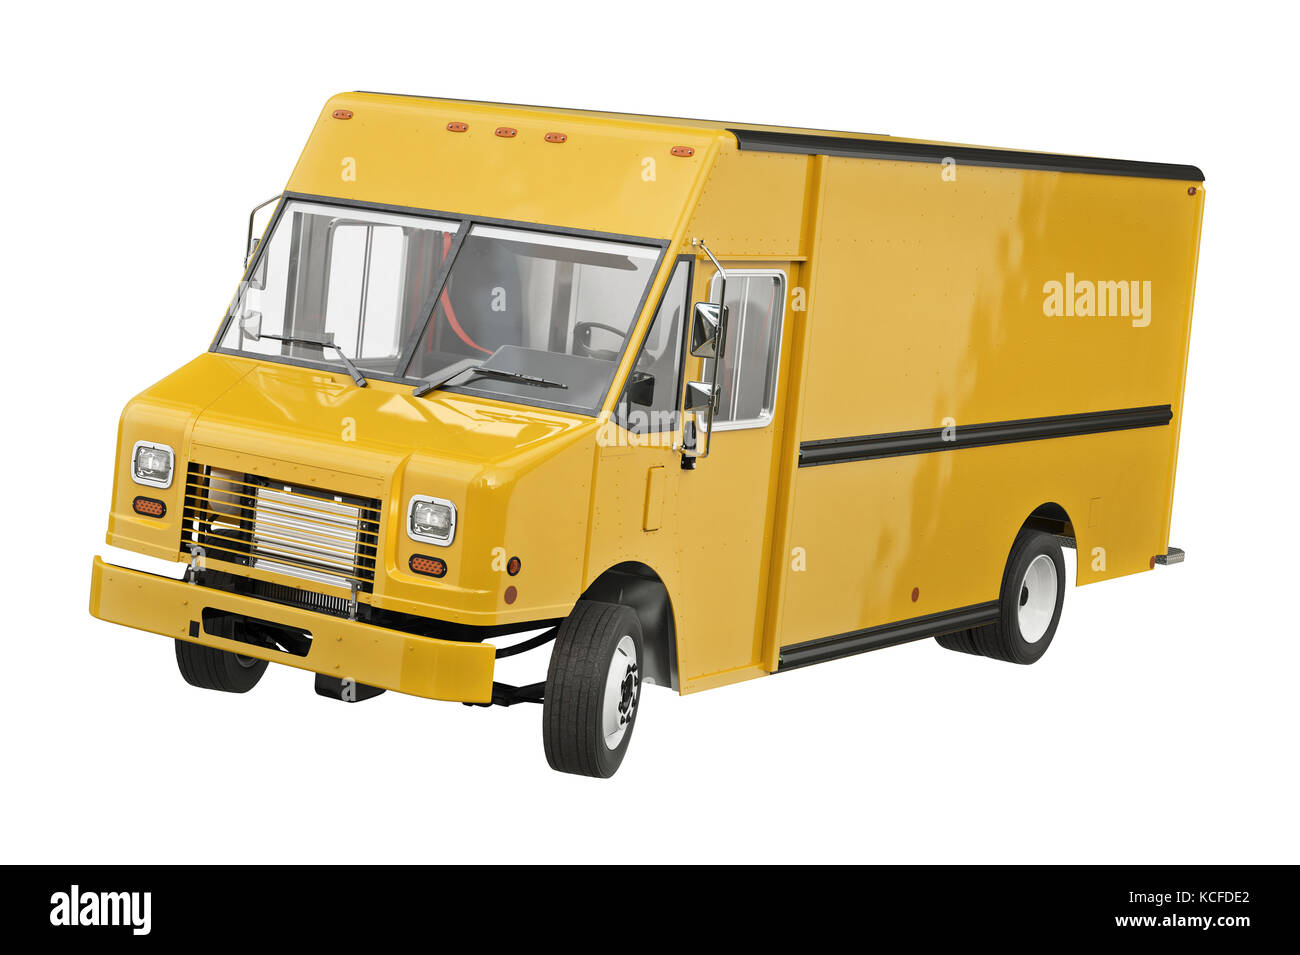 Food truck cafe Stock Photo